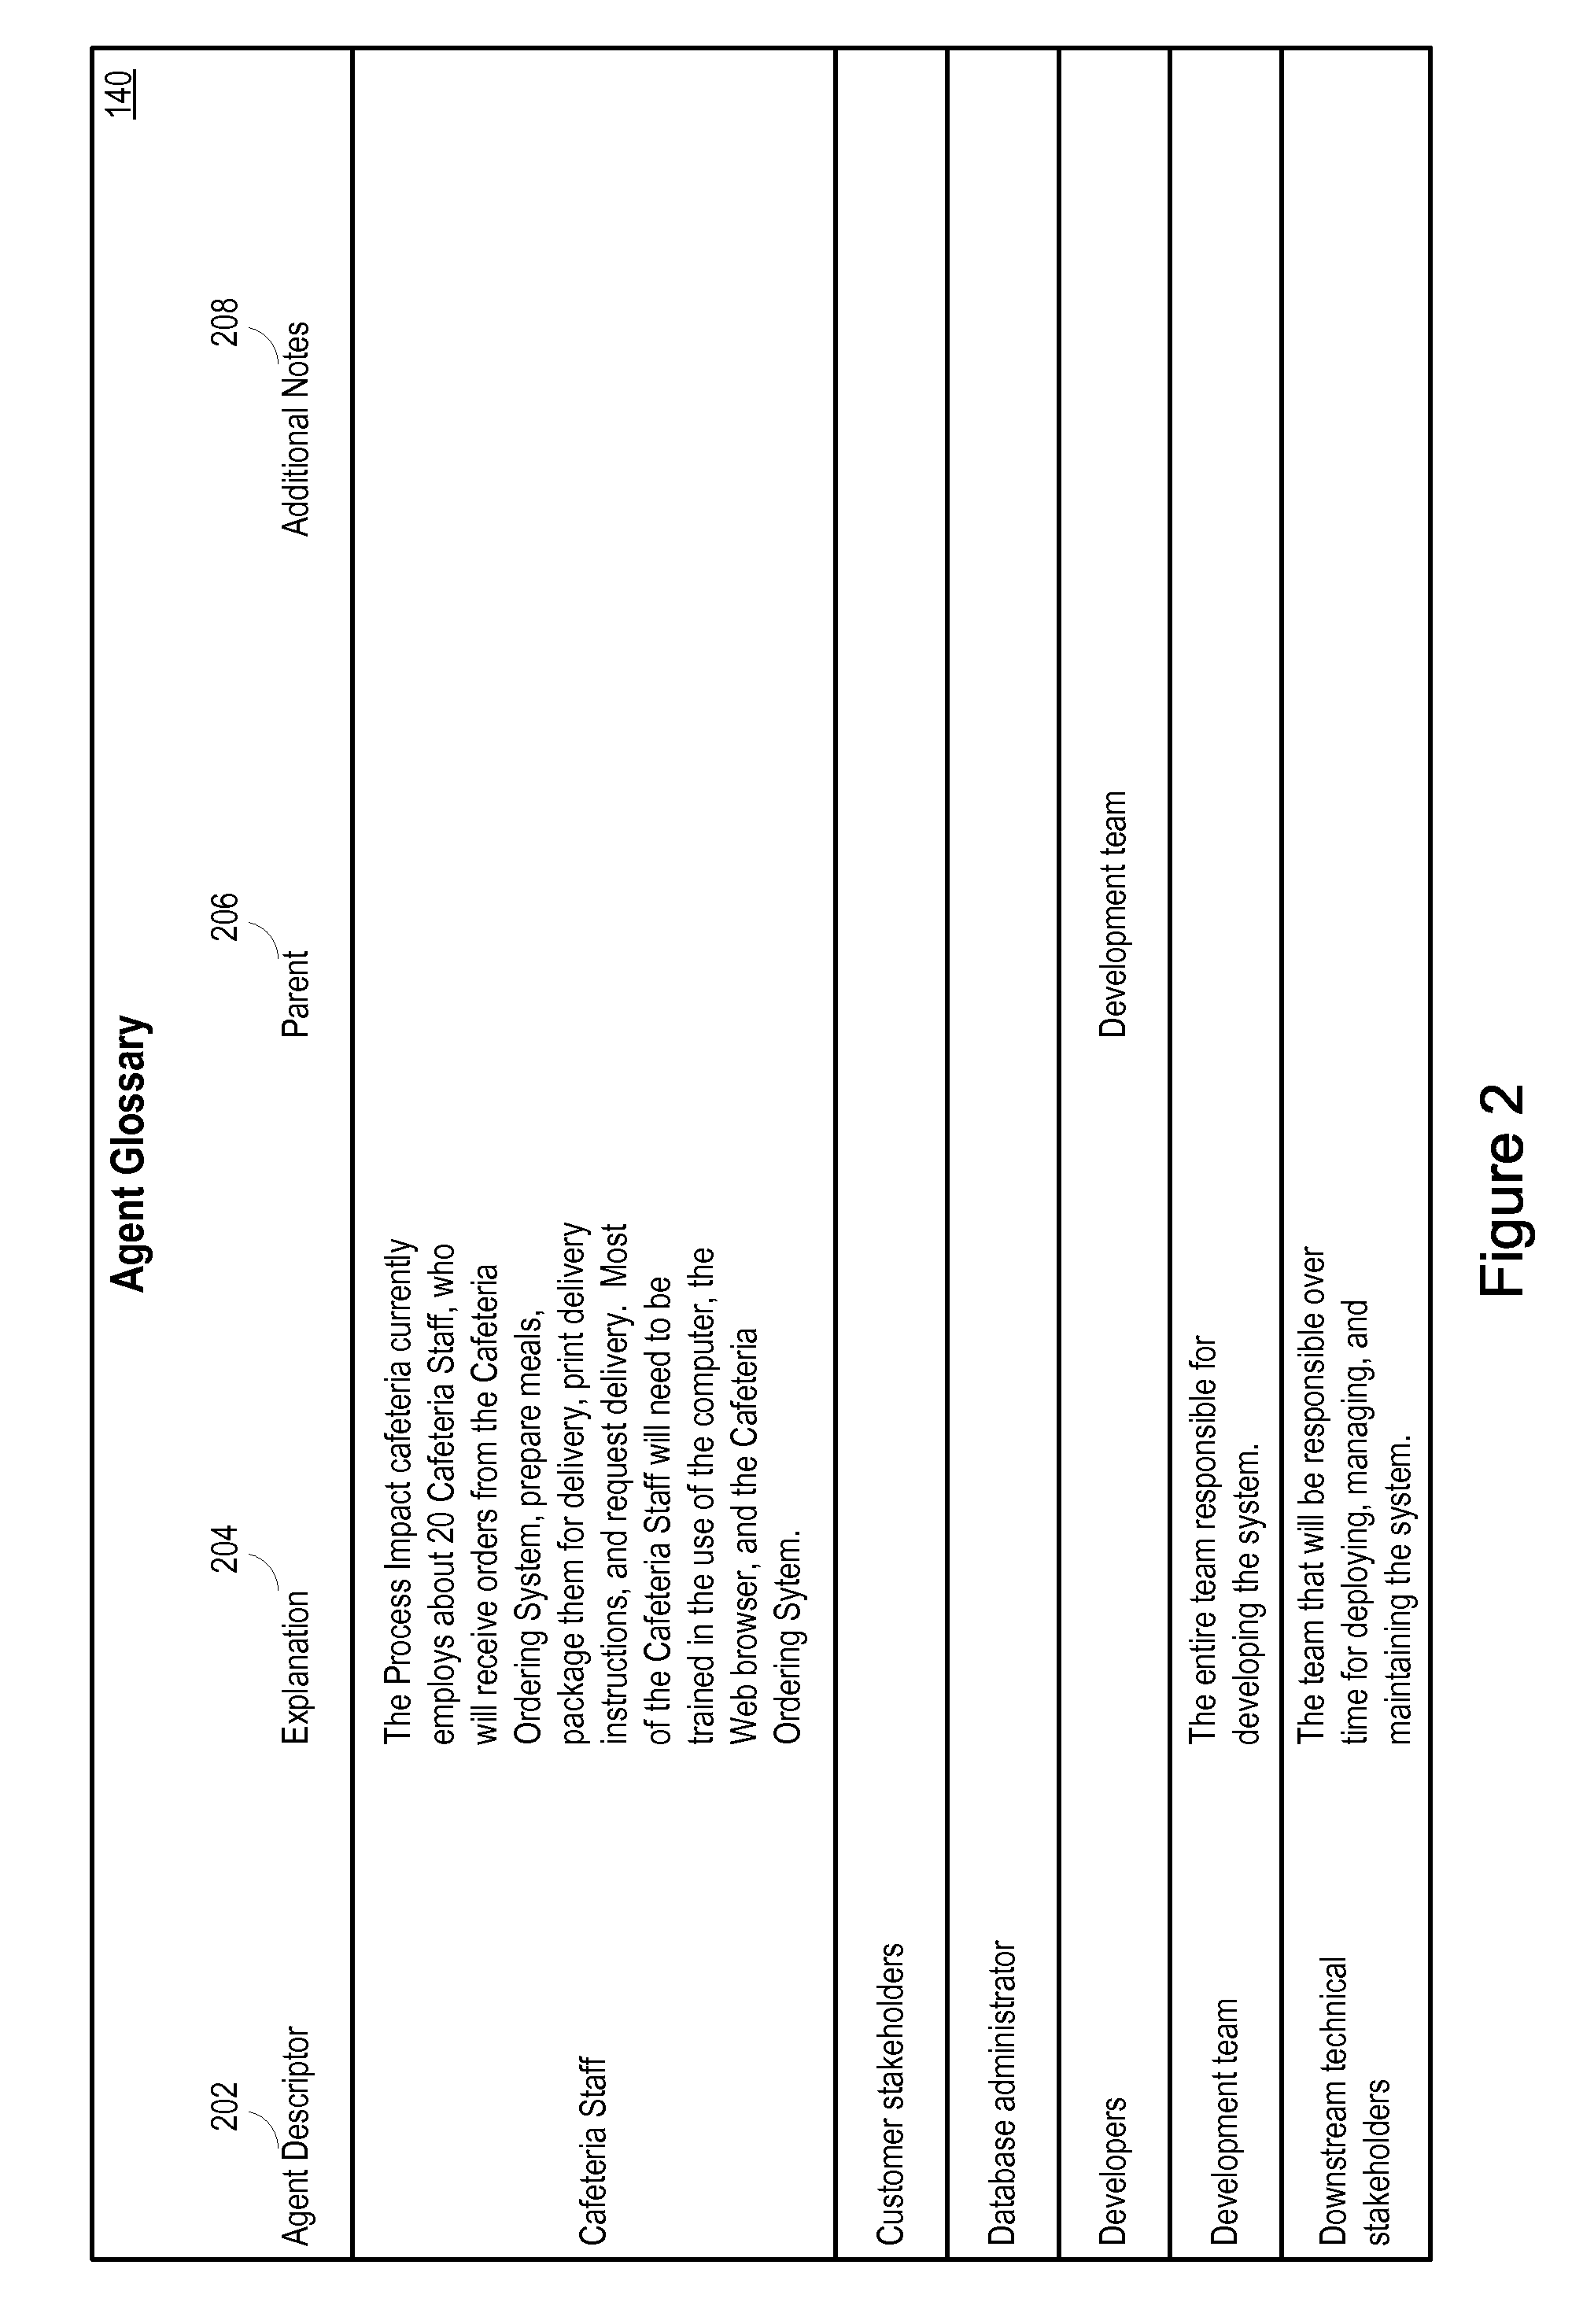 Document analysis, commenting, and reporting system